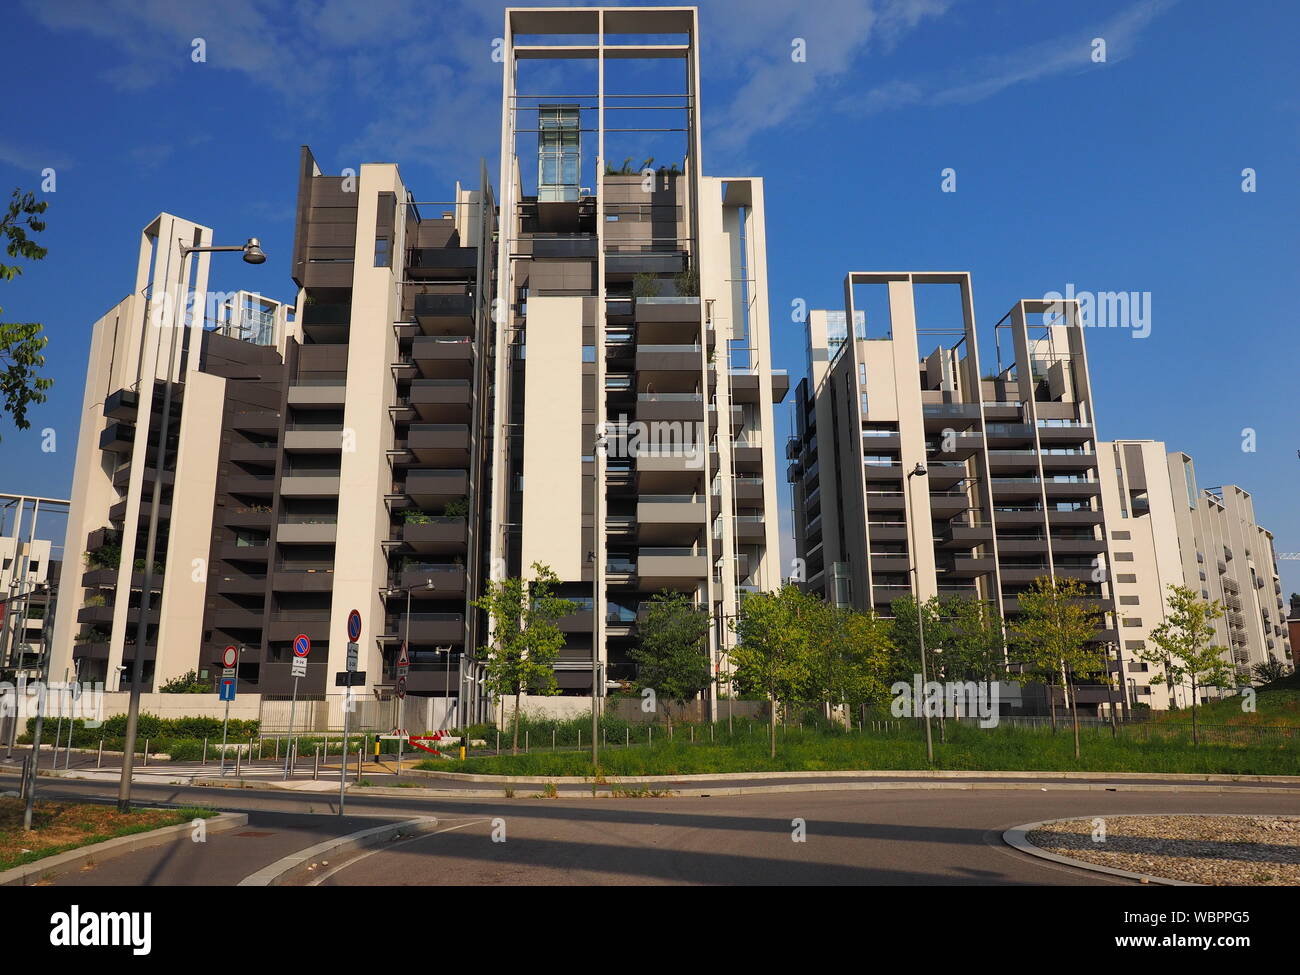 MILAN, ITALY - AUGUST 24, 2019: Milan (Lombardy, Italy): modern palaces and office buildings in the new Portello area Stock Photo